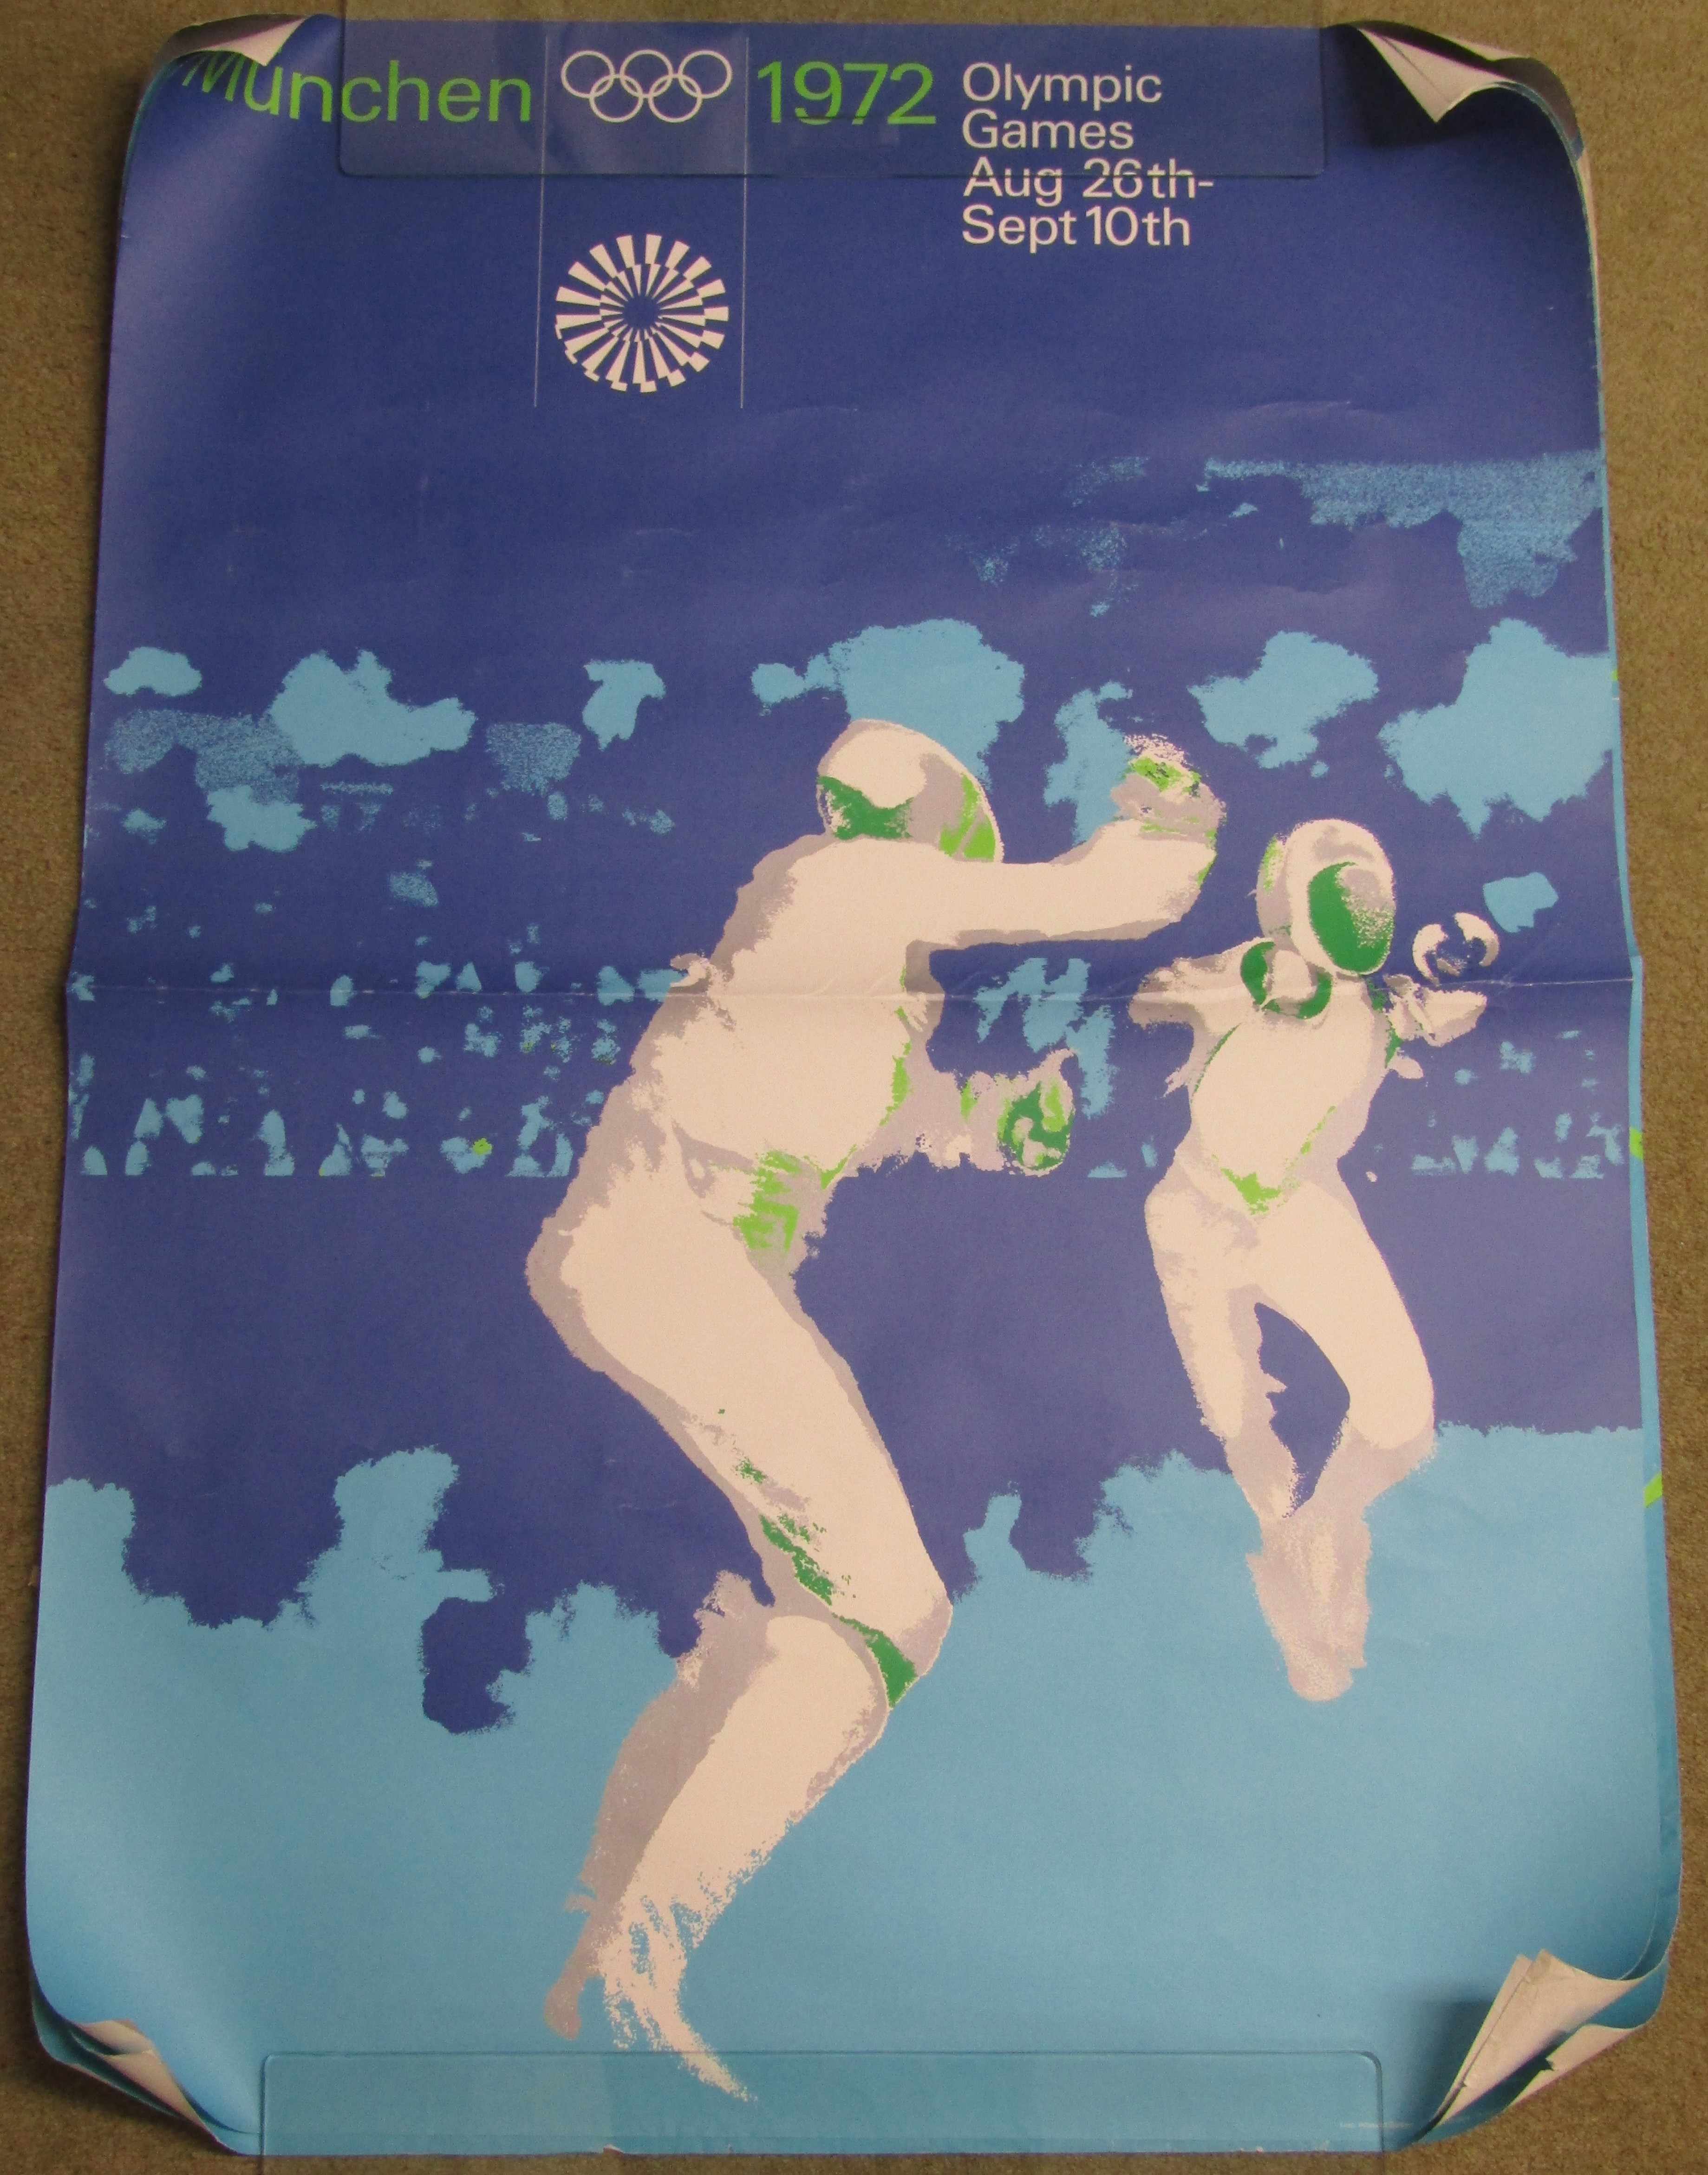 3 x 1972 Aug 26th - Sept 10th Olympic Games posters - Fencing Munchen - Munich Cycling - Kiel - Image 5 of 5